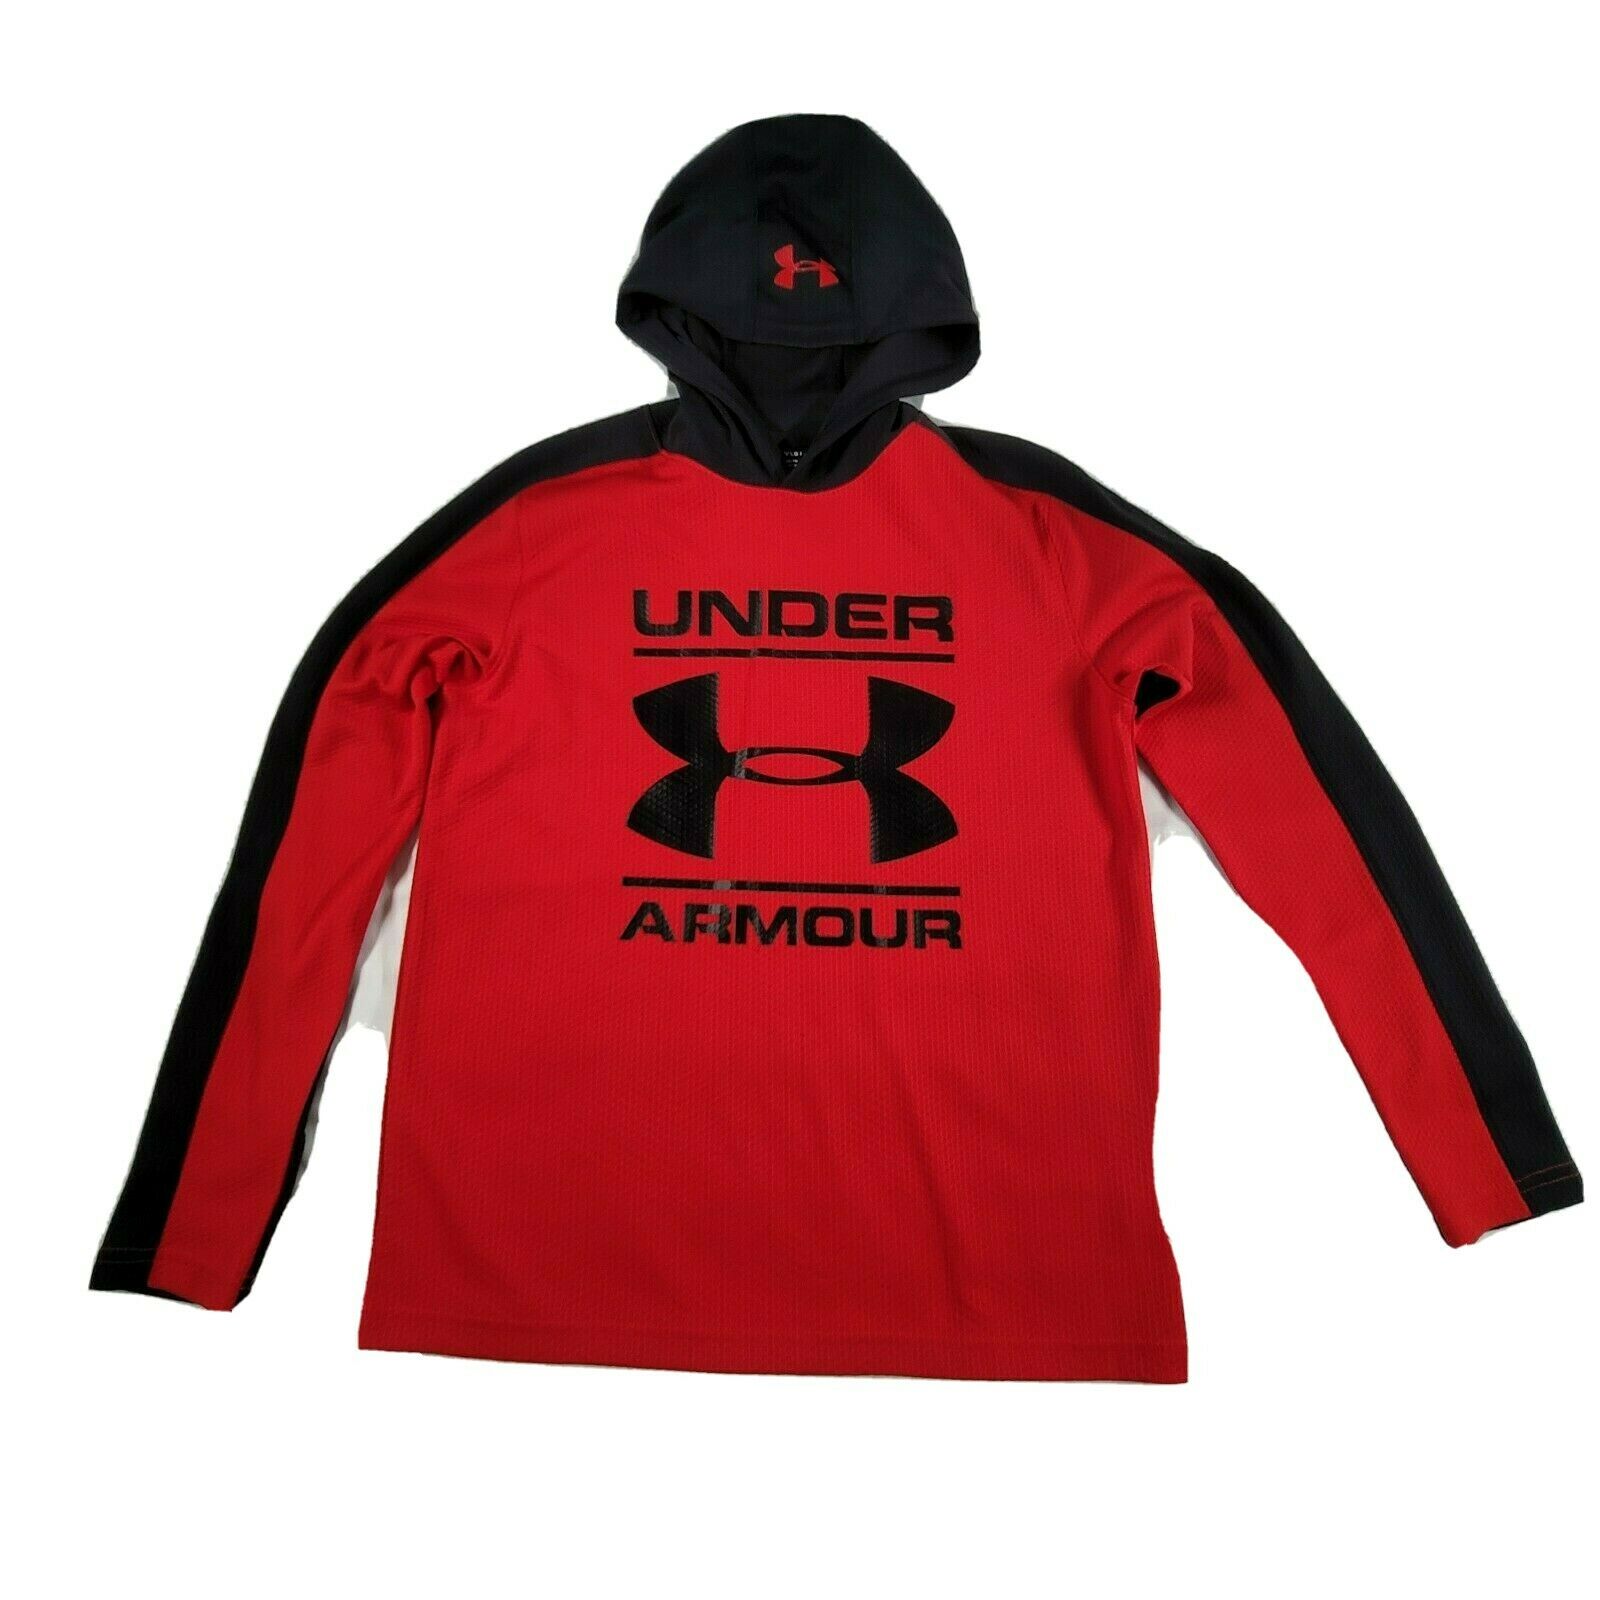 Under Armour Boys Youth L Red Black Cold Gear Long Sleeve Light Hooded Pullover